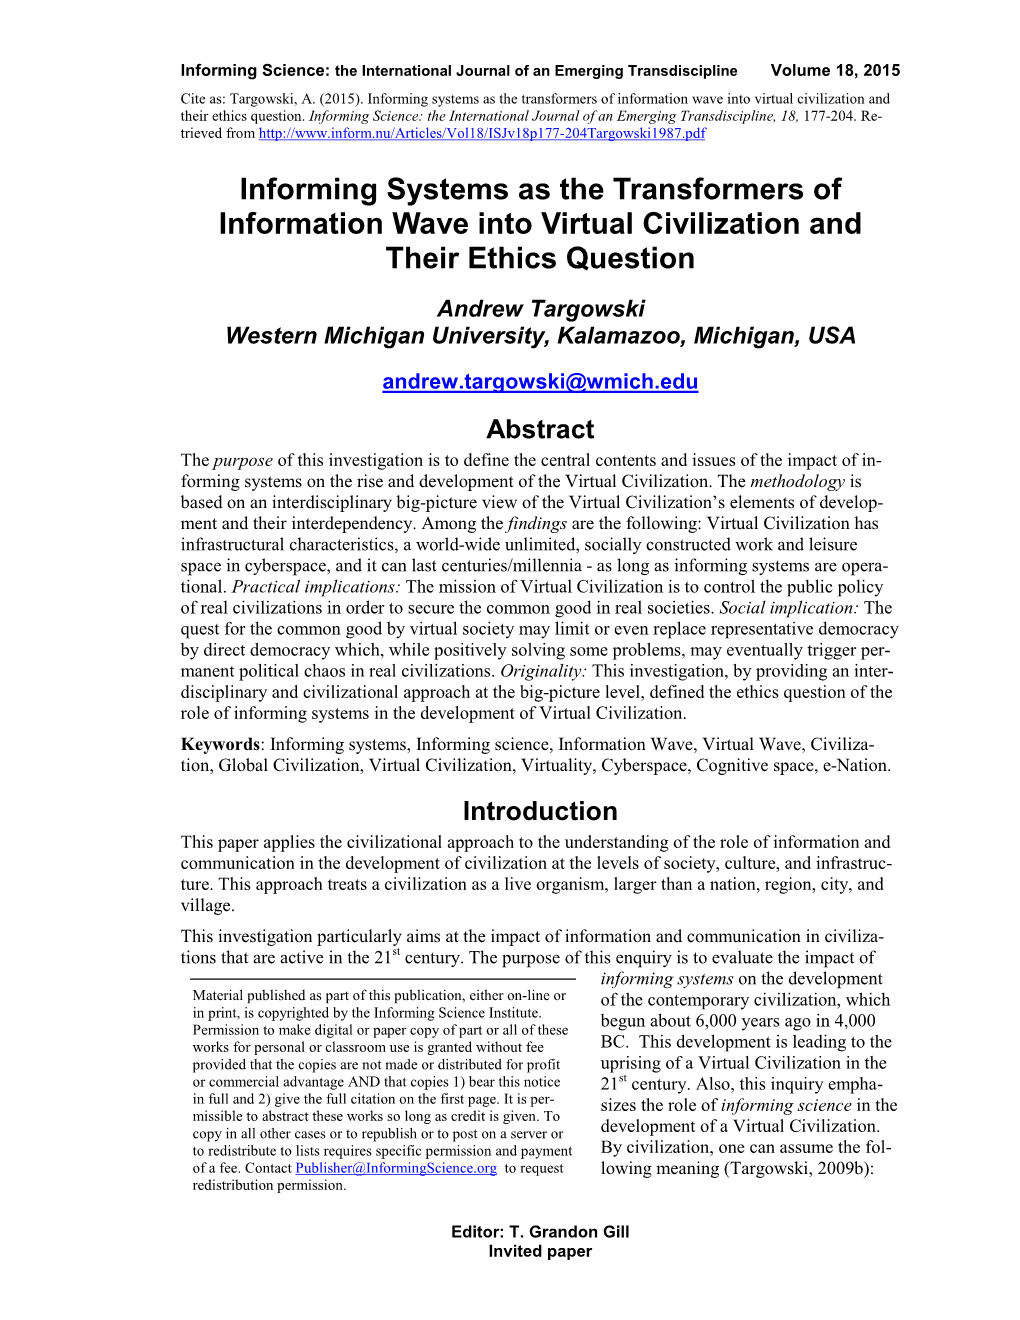 Informing Systems As the Transformers of Information Wave Into Virtual Civilization and Their Ethics Question